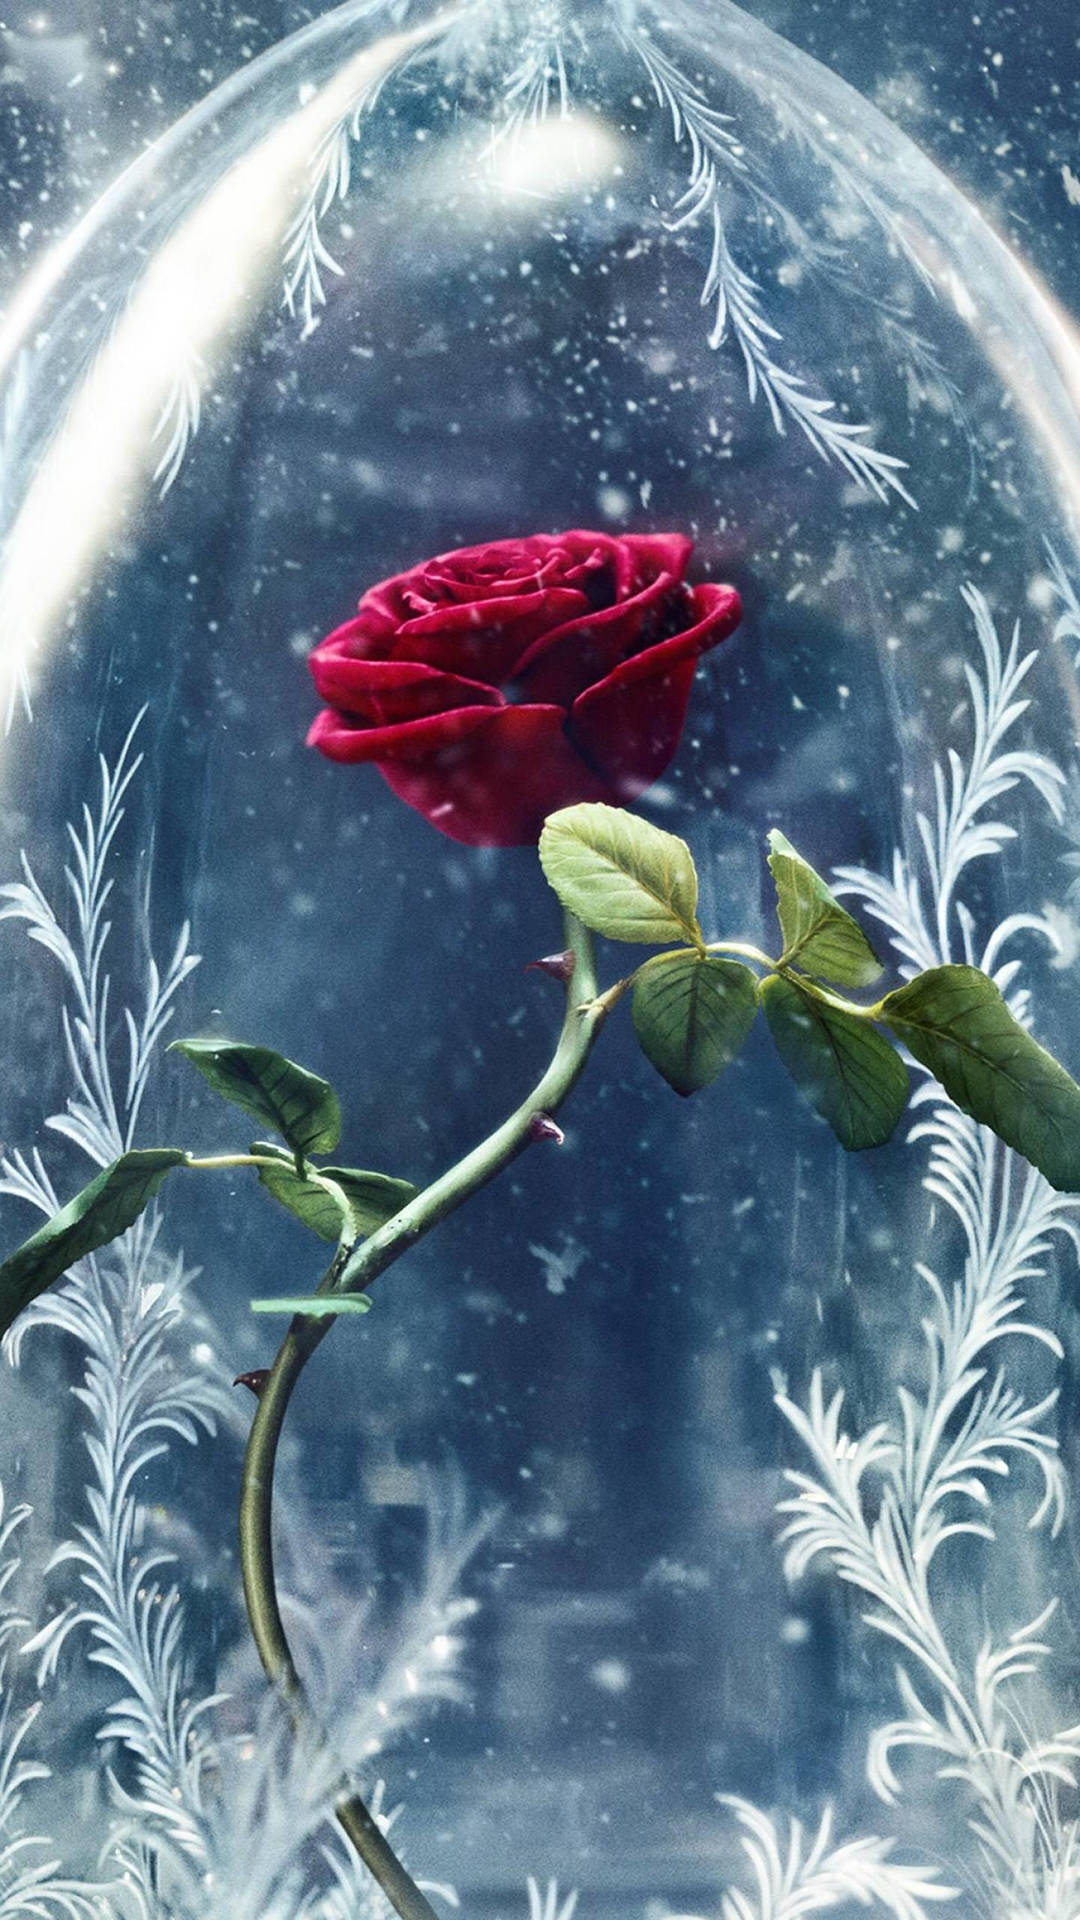 Beauty And The Beast Rose Under Snow Wallpaper